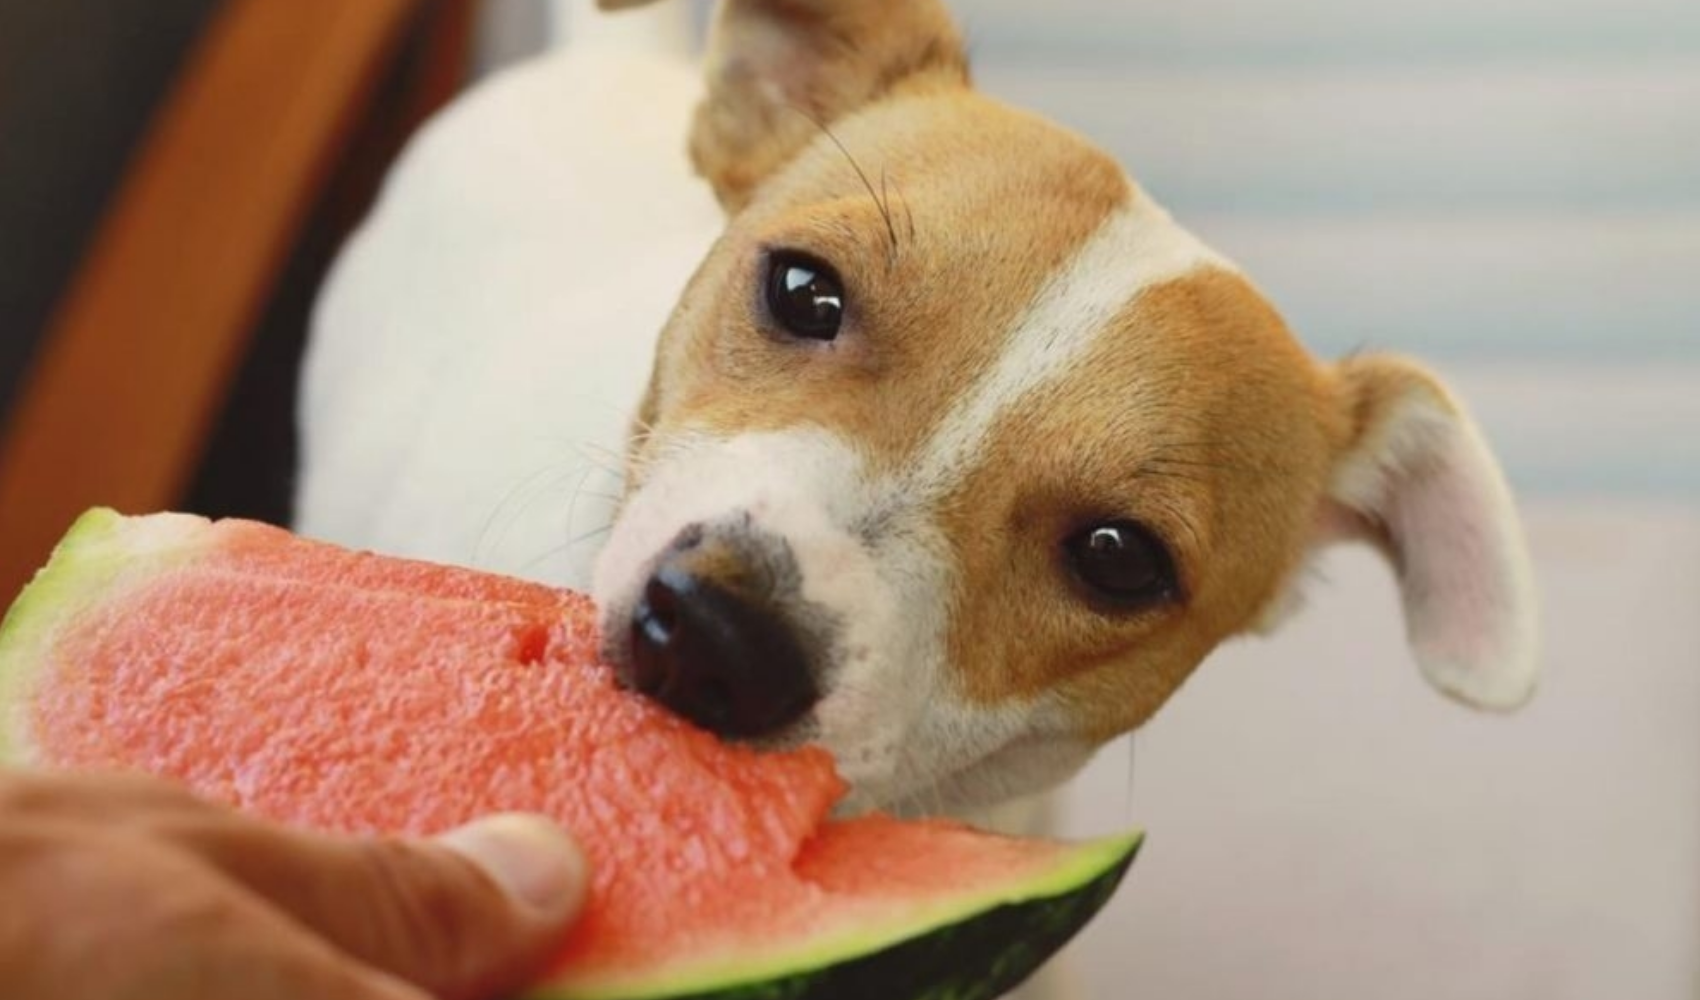 20 people foods that are safe and healthy for your dog